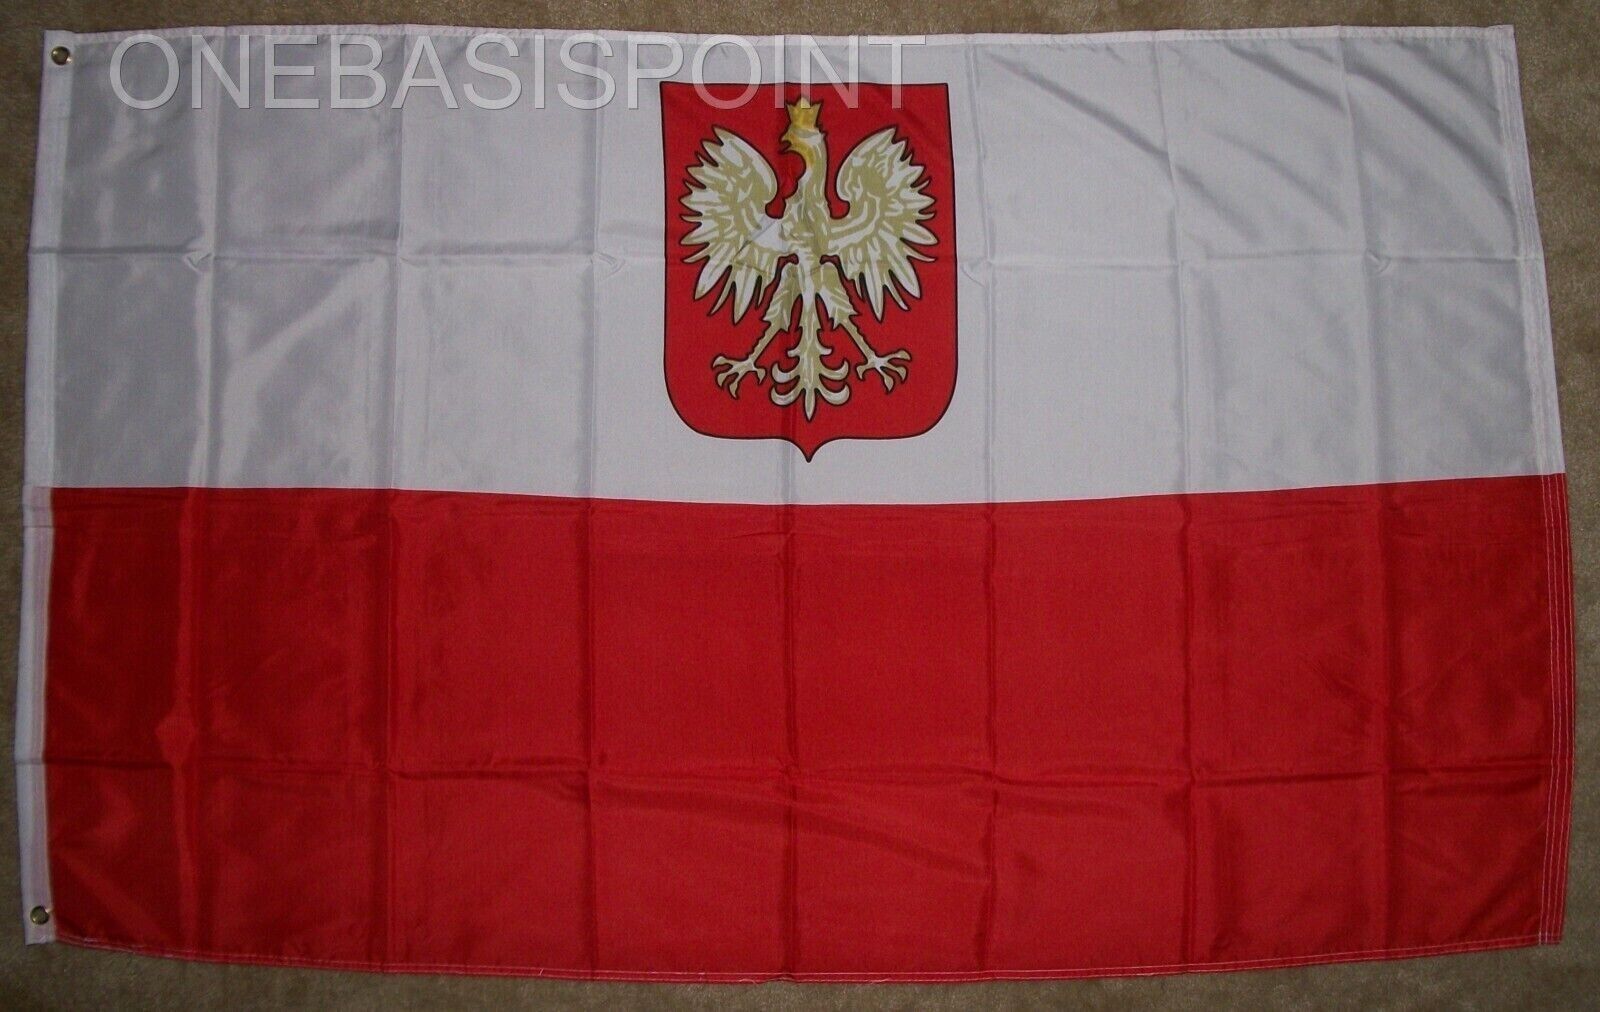 Vintage Old Poland   3\' x 5\' Polyester Grommeted Flag  (Circa 2000)